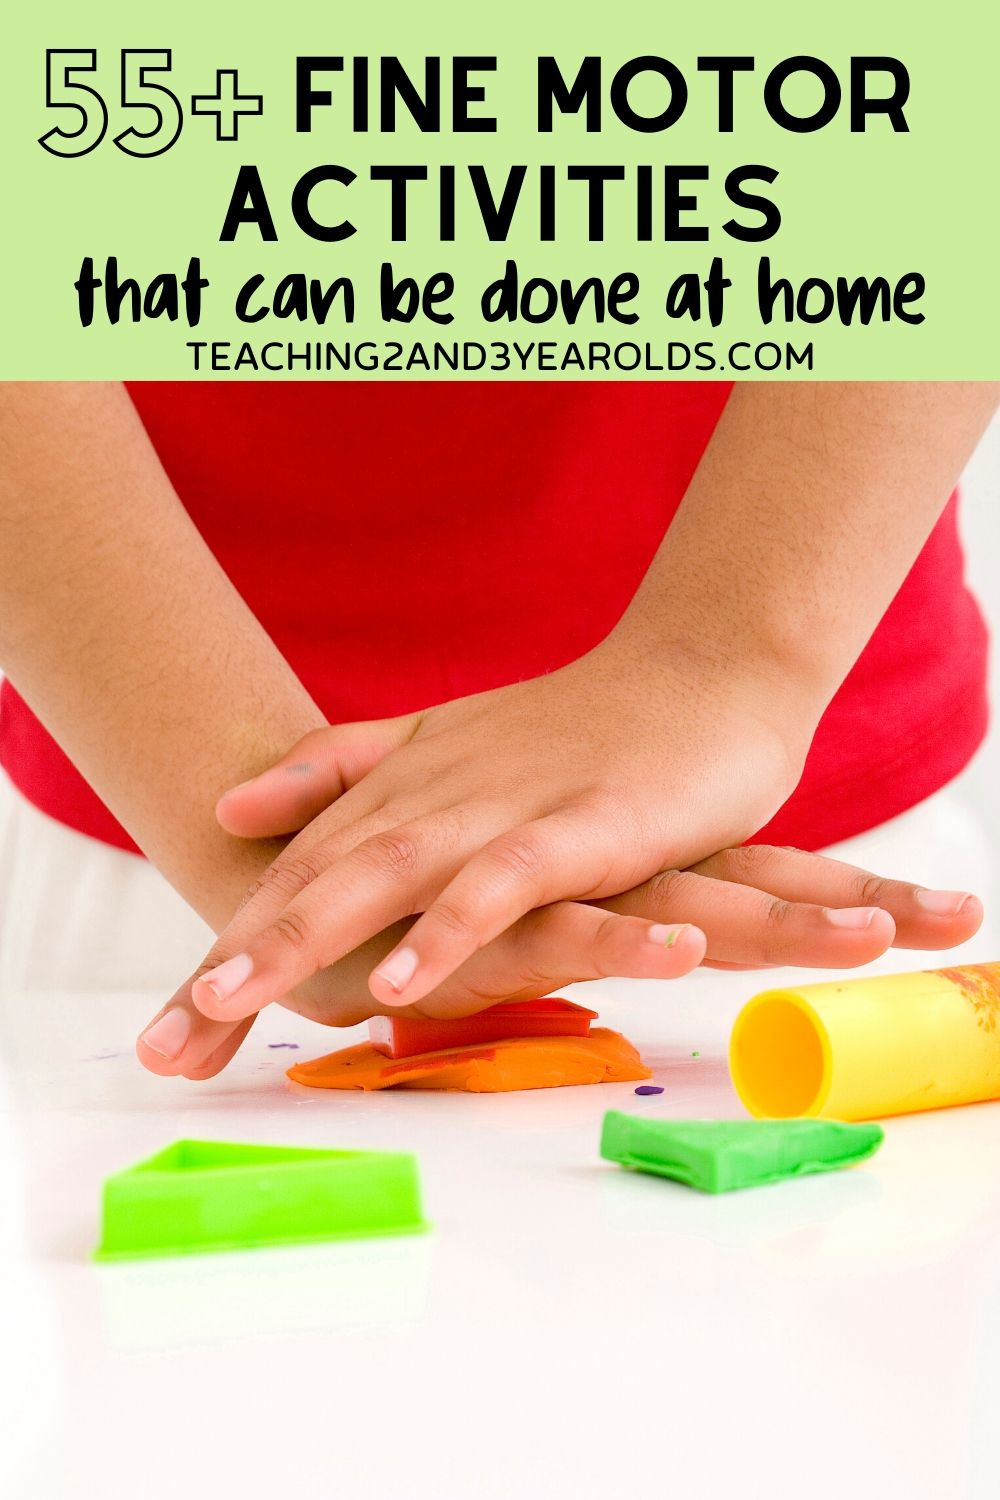 55+ Ways to Strengthen Fine Motor Skills at Home